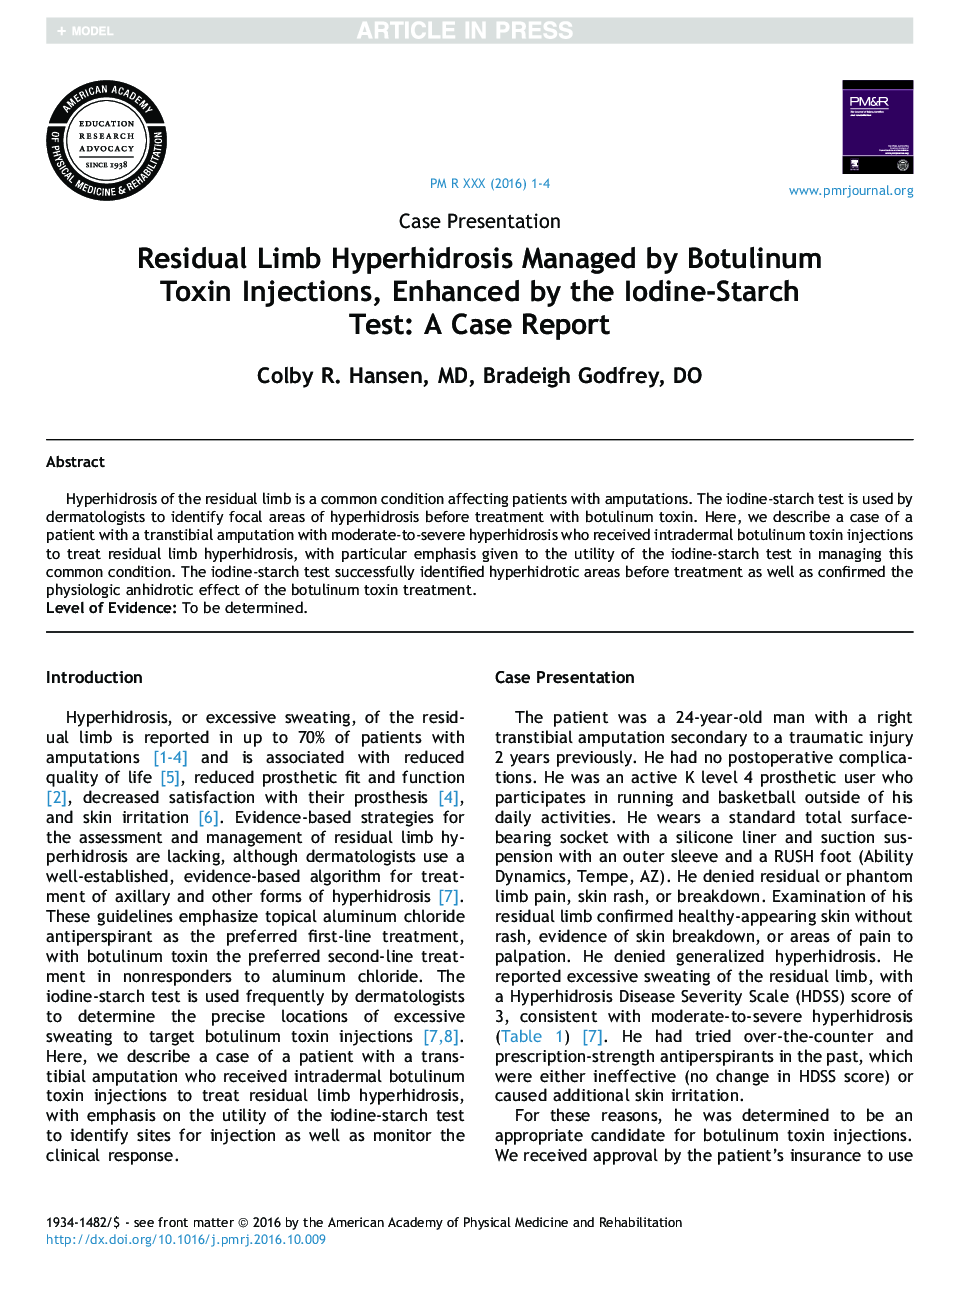 Residual Limb Hyperhidrosis Managed by Botulinum Toxin Injections, Enhanced by the Iodine-Starch Test: A Case Report